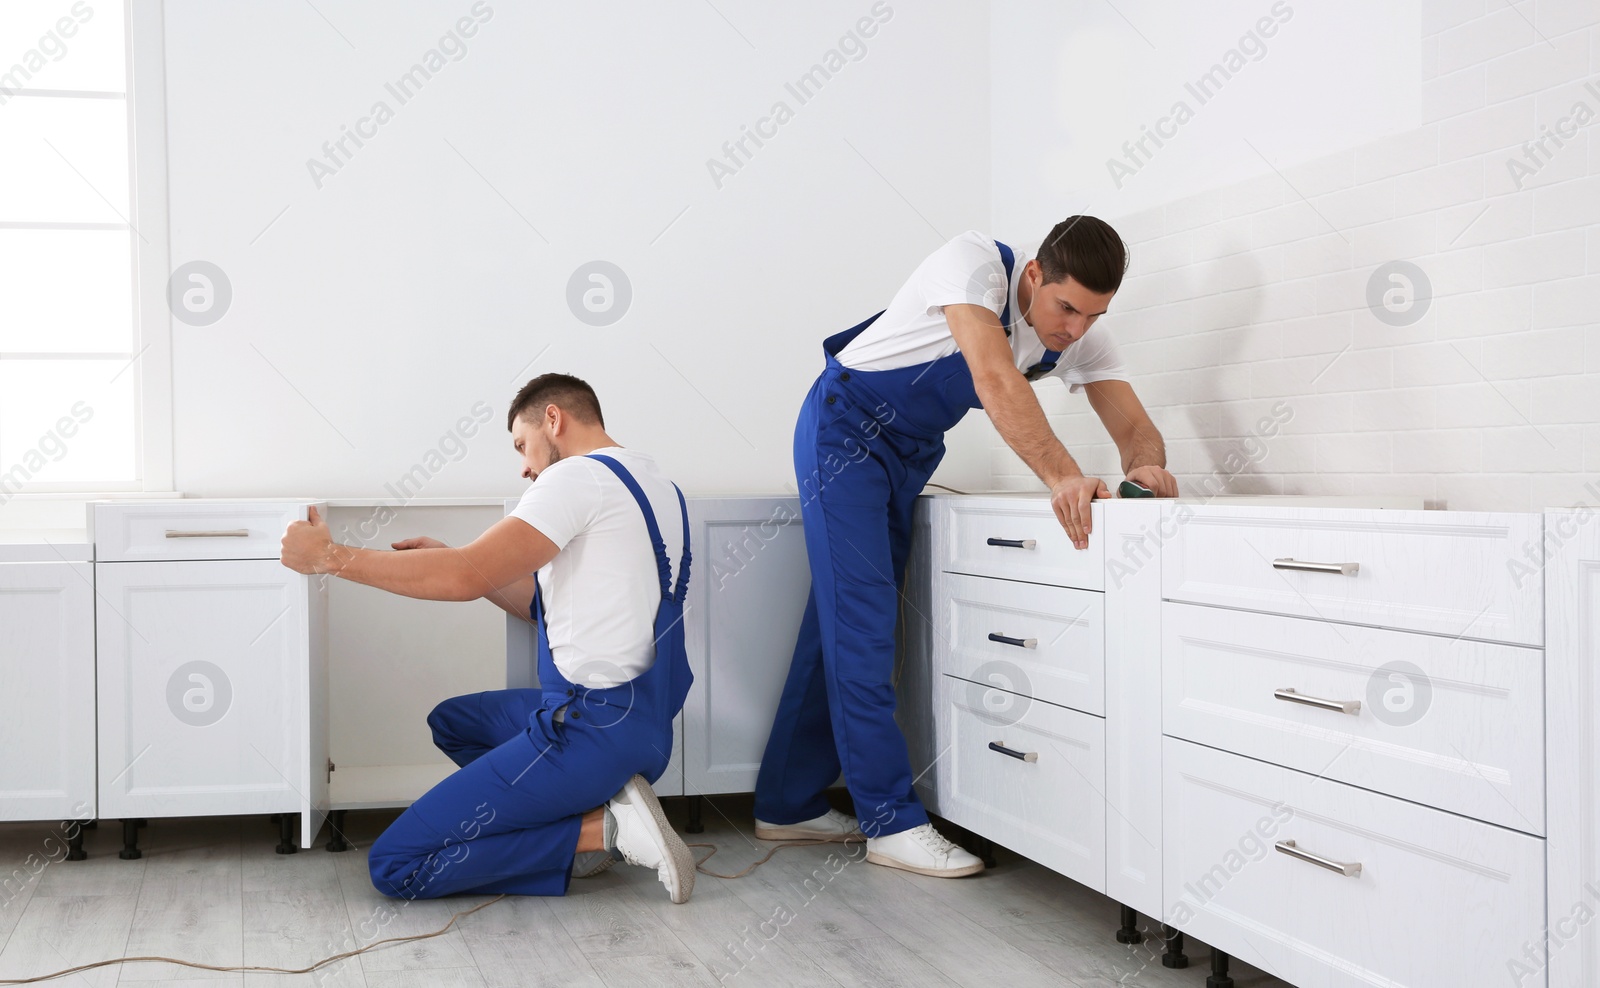 Photo of Maintenance workers installing new kitchen furniture indoors